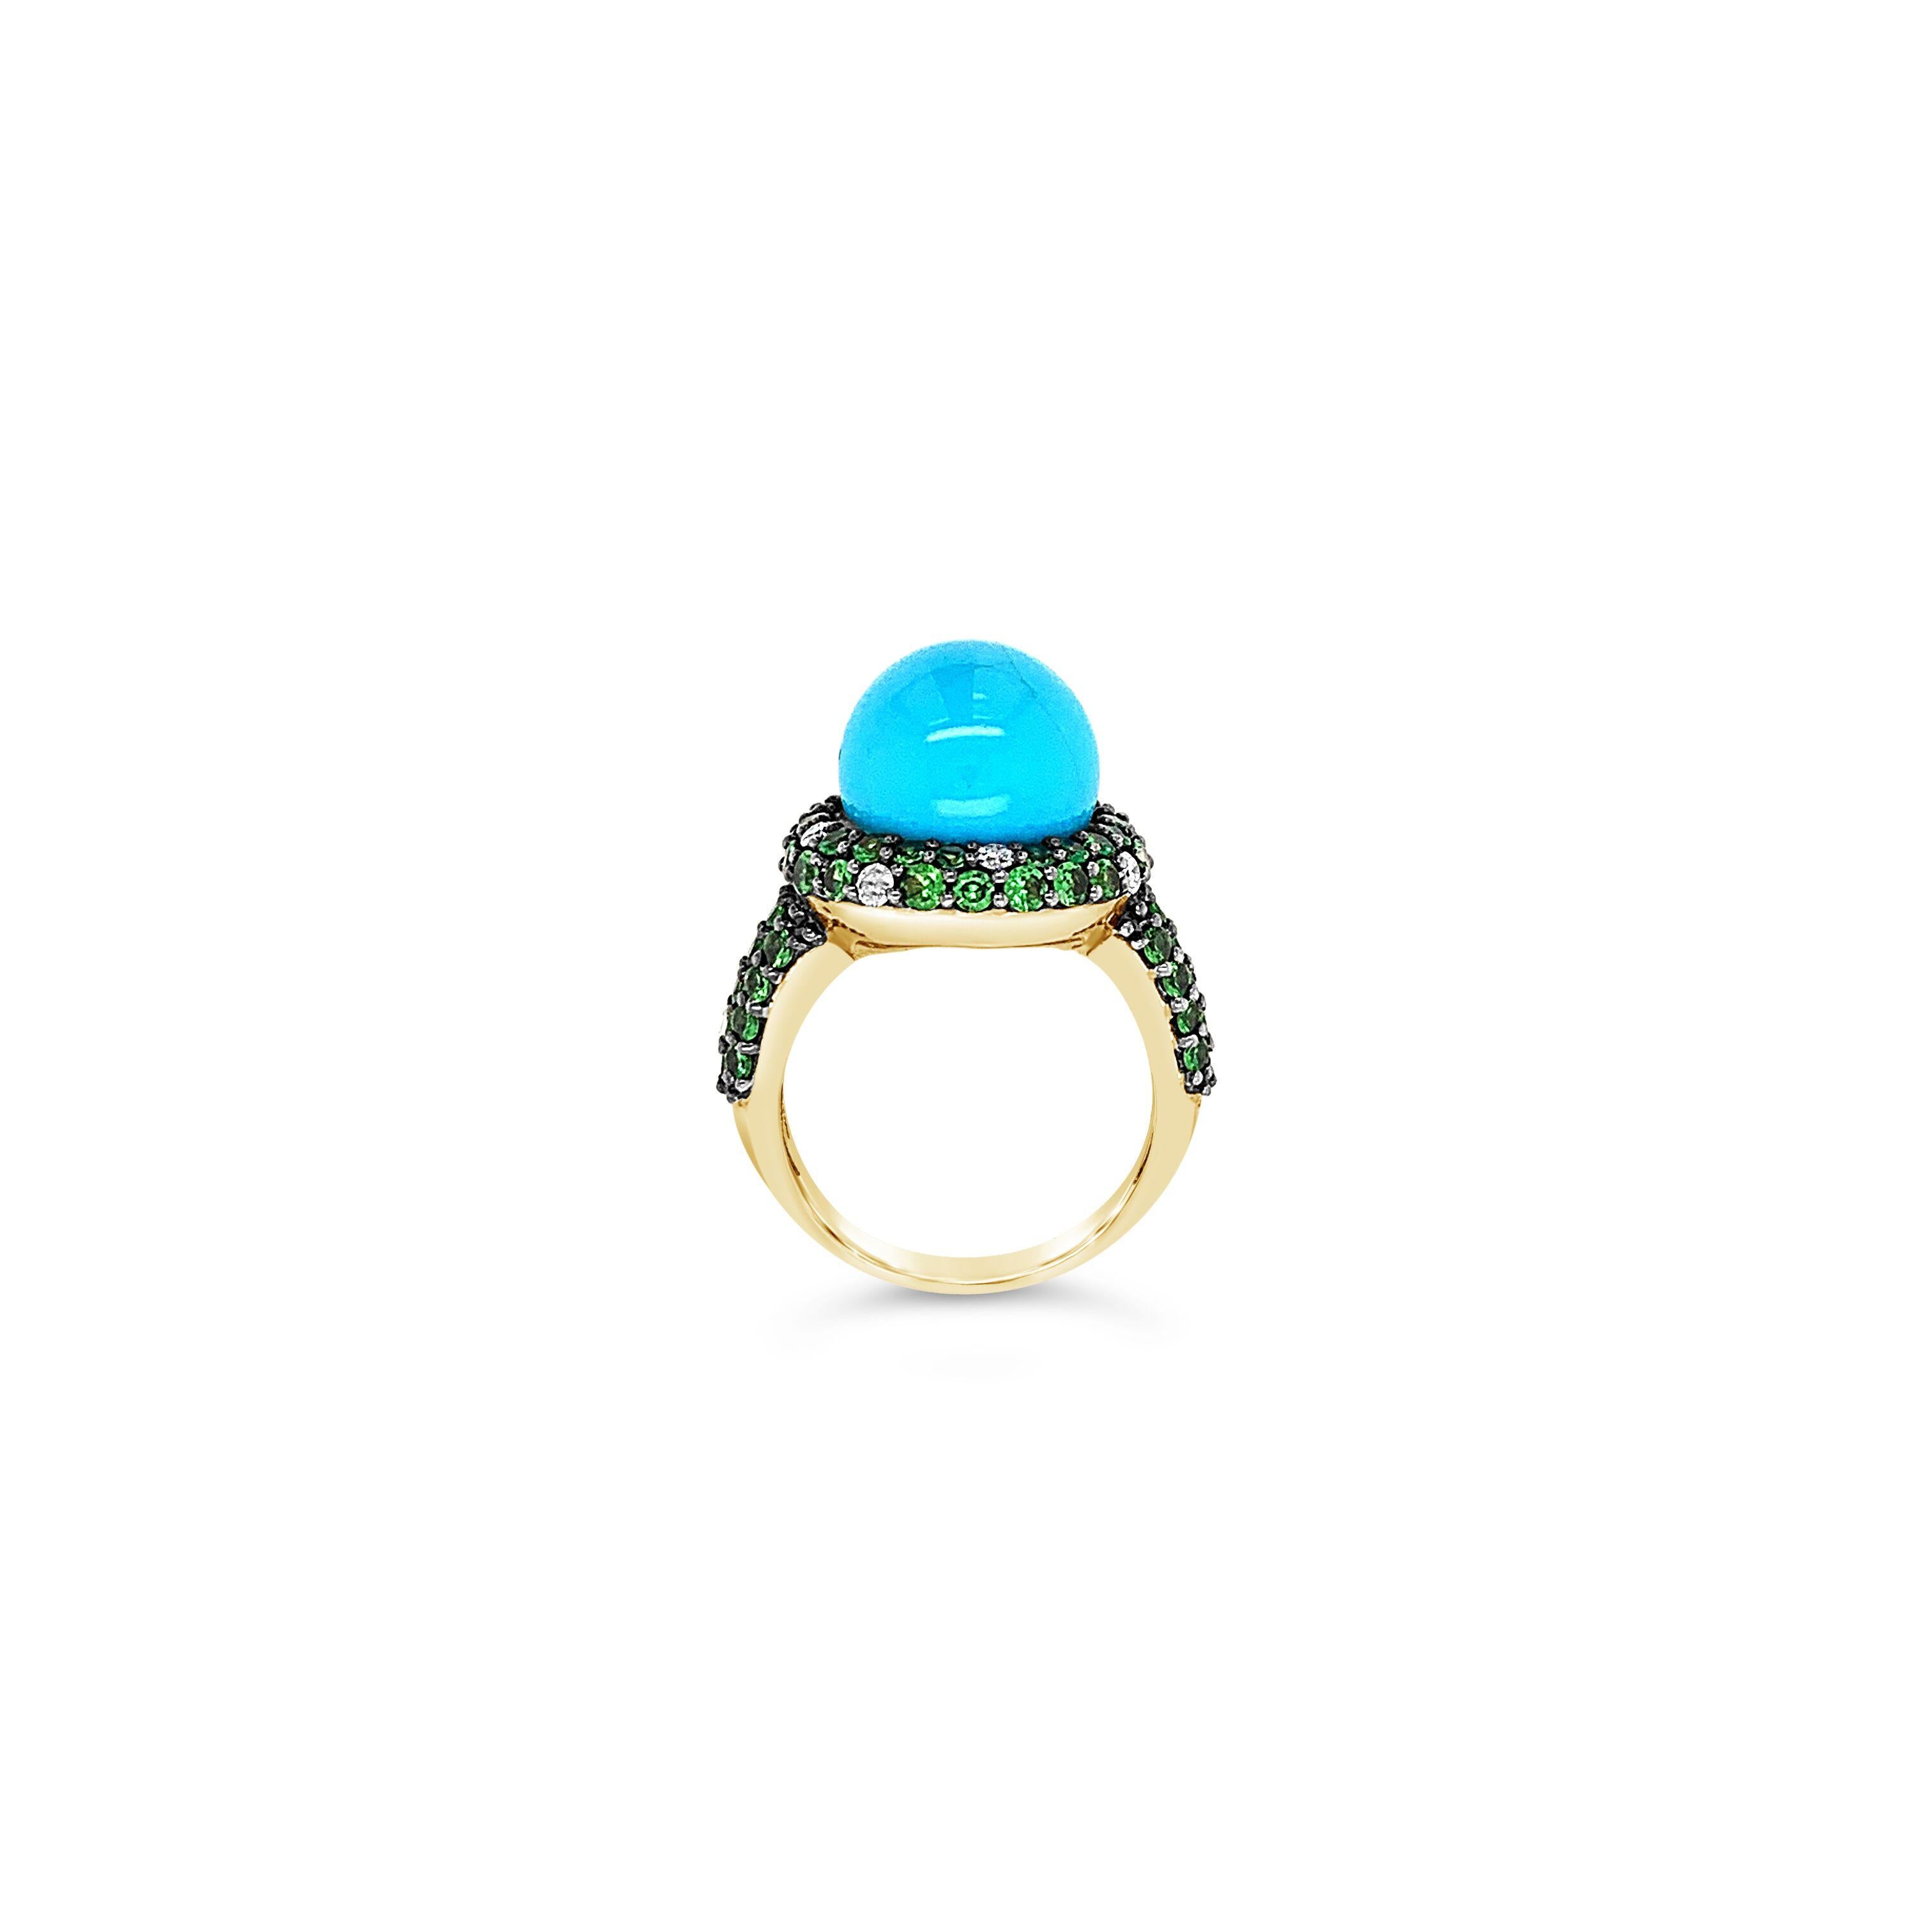 Carlo Viani® Ring featuring 8 1/8 cts. Robins Egg Blue Turquoise™, 1 3/4 cts. Forest Green Tsavorite™, 1/4 cts. Vanilla Diamonds® set in 14K Honey Gold™

Item comes with a Carlo Viani® suede pouch!